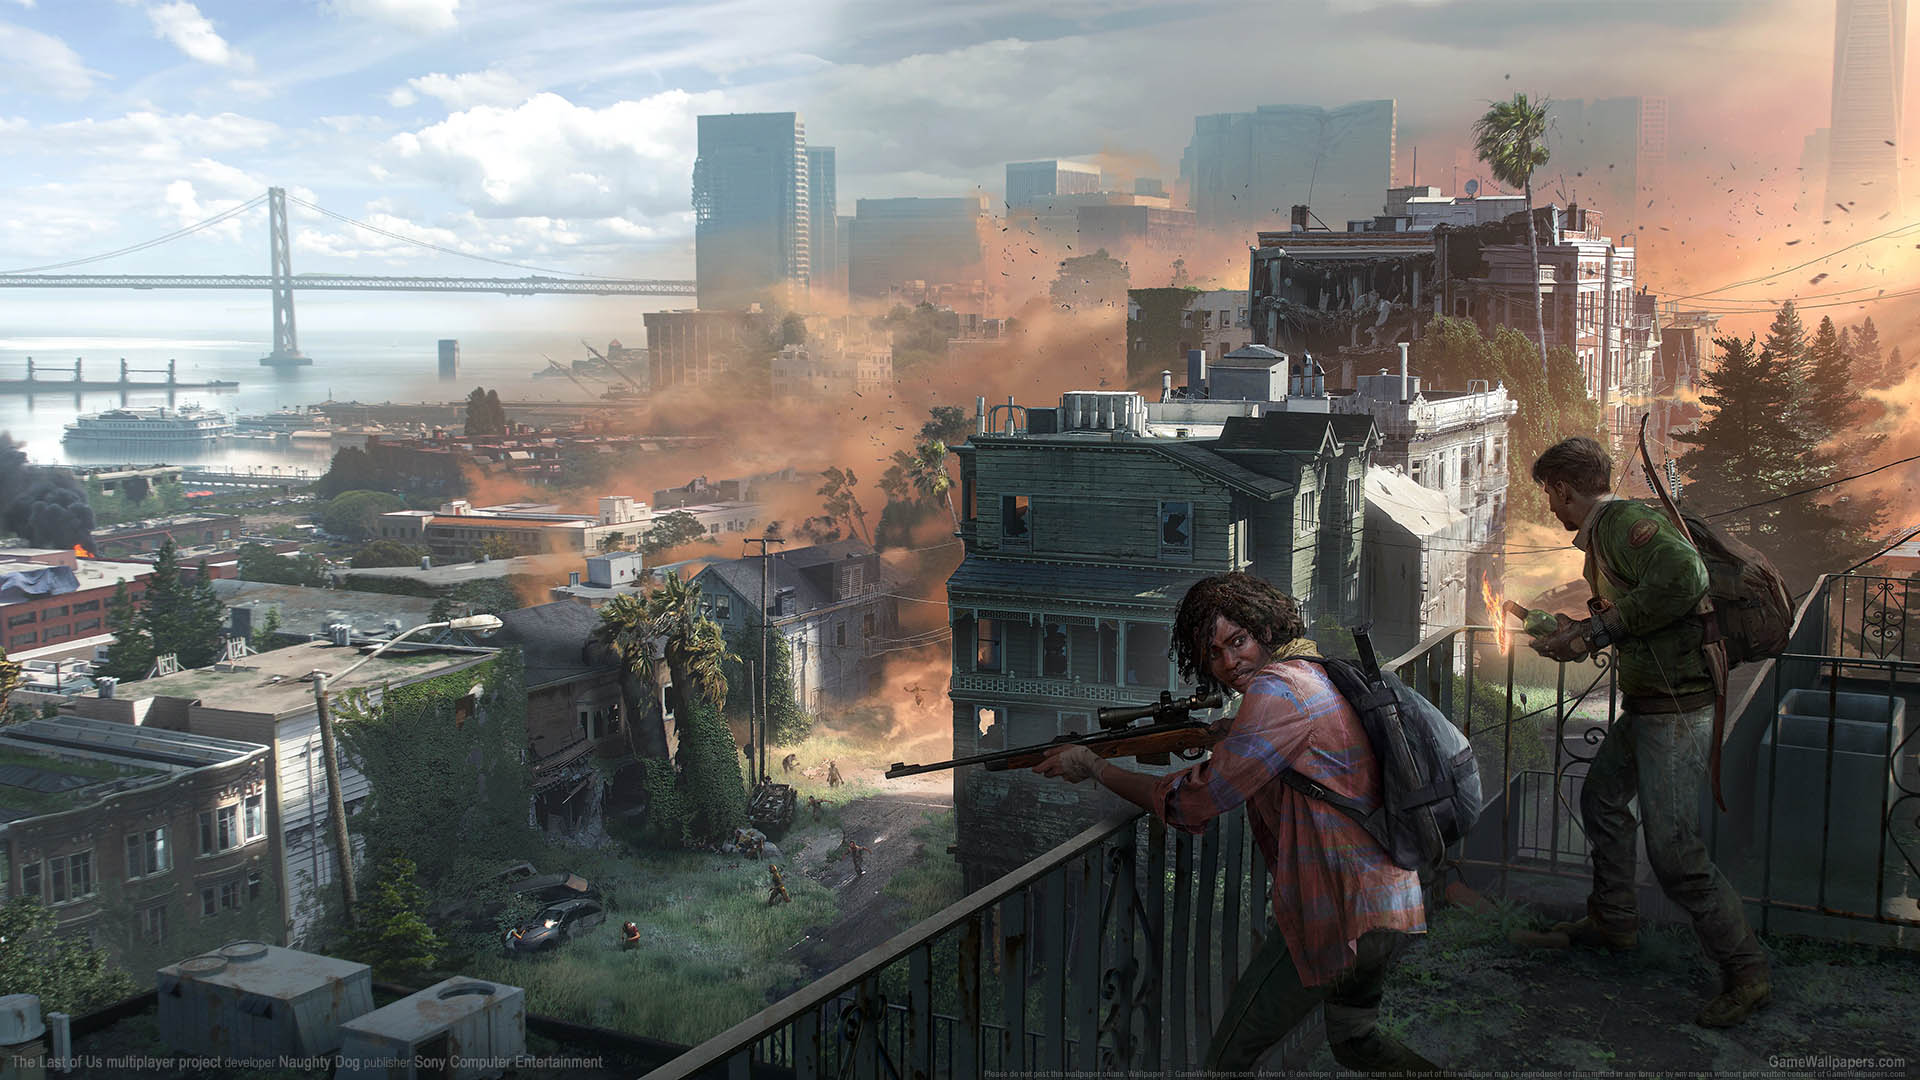 The Last of Us multiplayer project fond d'cran 01 1920x1080